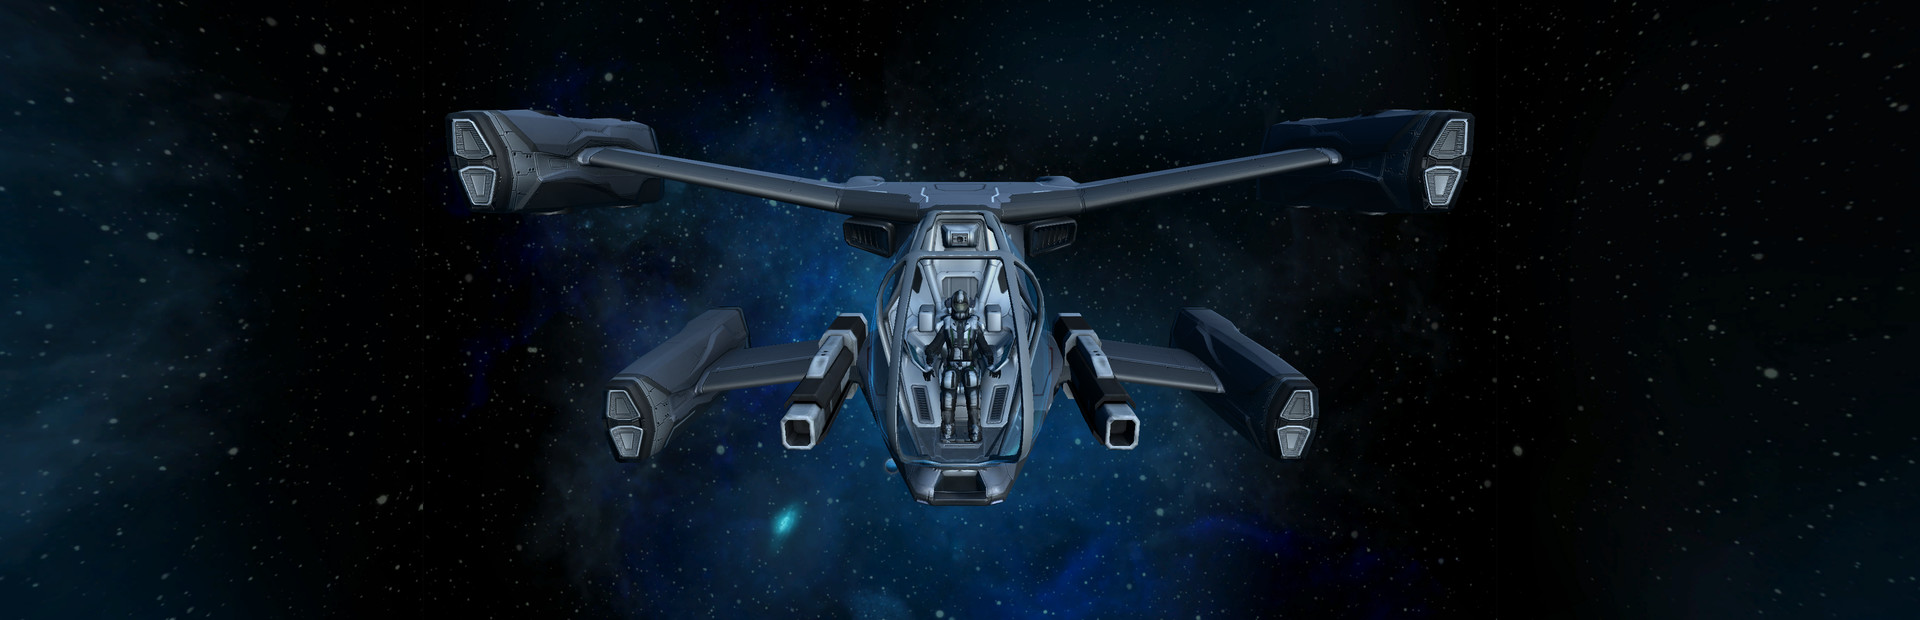 Starfighter Arduxim cover image